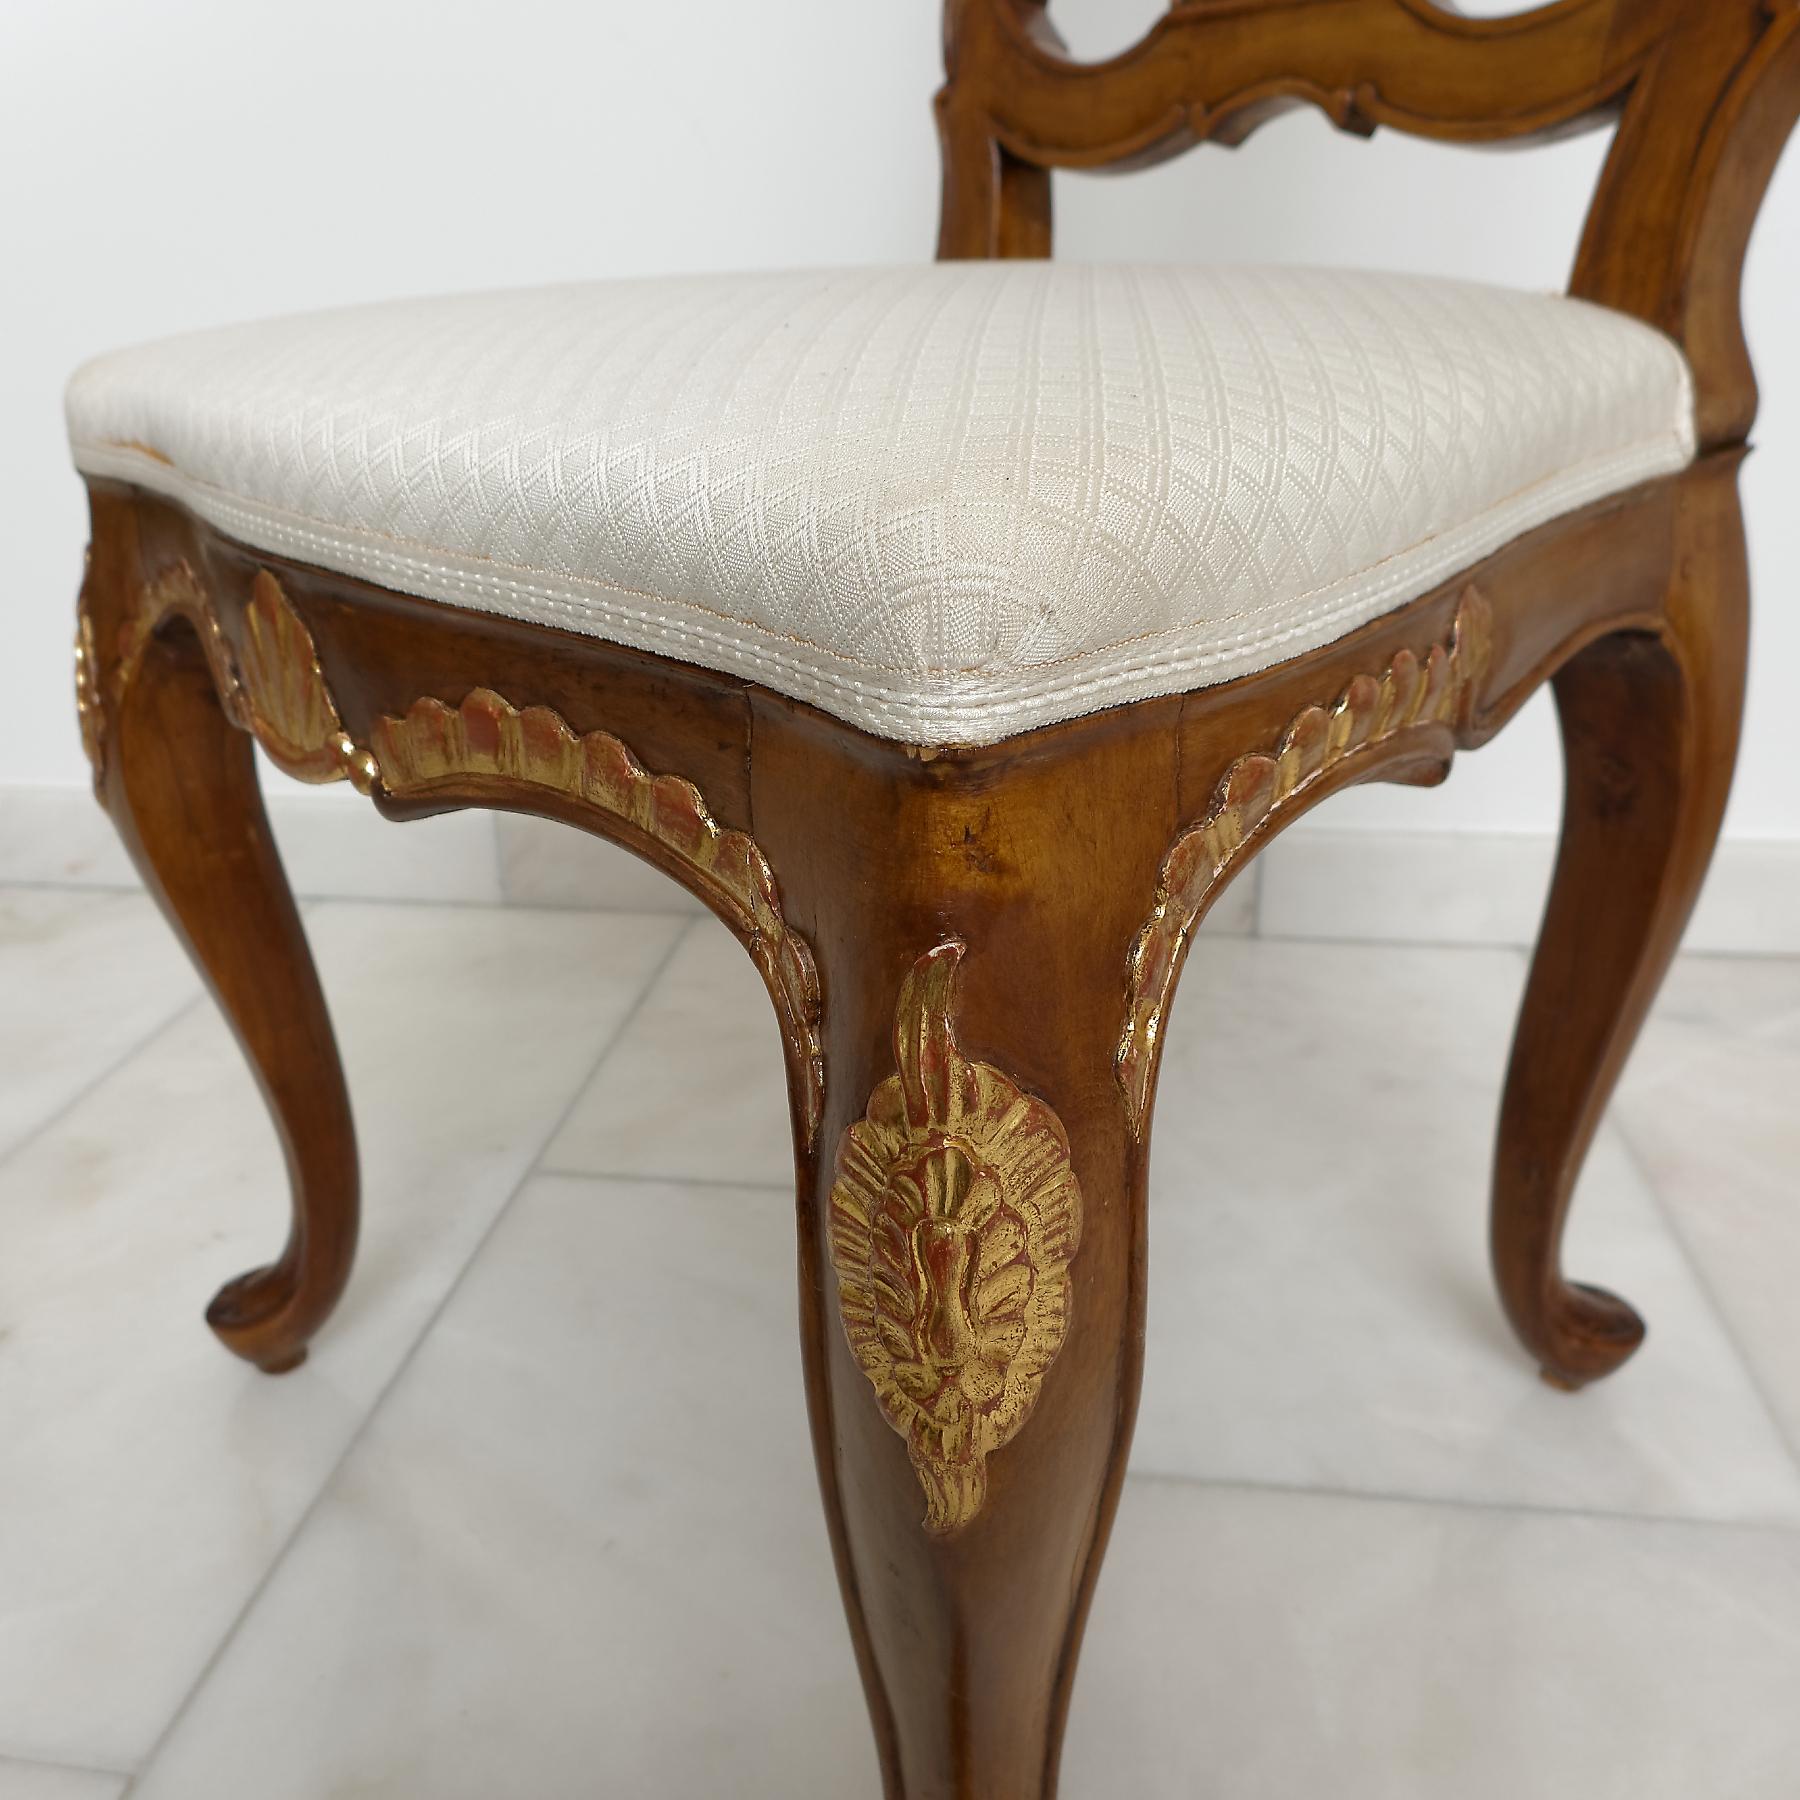 A set of six North European (Danish or North Germany) parcel-gilt beechwood dining chairs. The pierced back with shaped splat, above a bow-fronted padded seat, on cabriole legs. Seat rail, legs and top of the back with decorative foliage parcel gilt